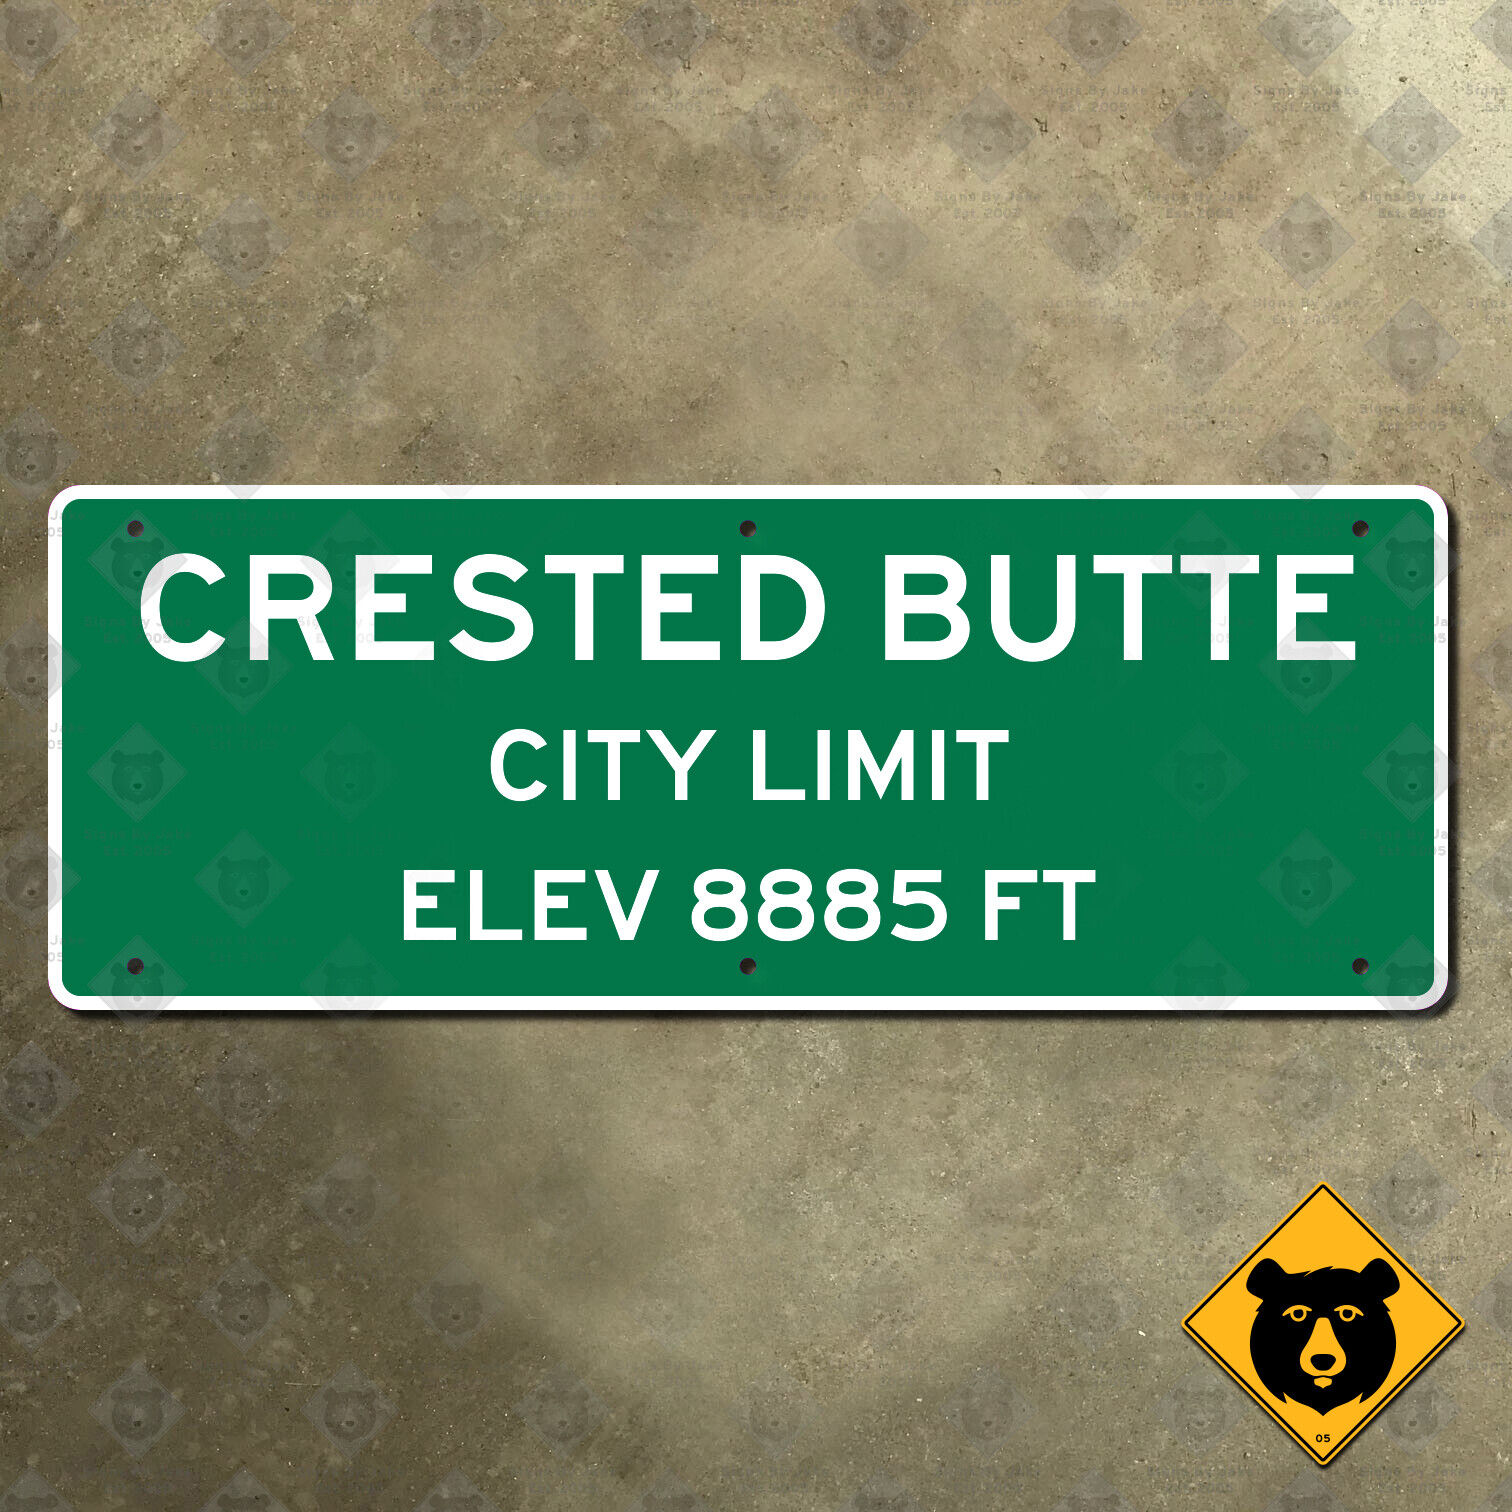 Crested Butte Colorado city town limit boundary road highway sign 29x11